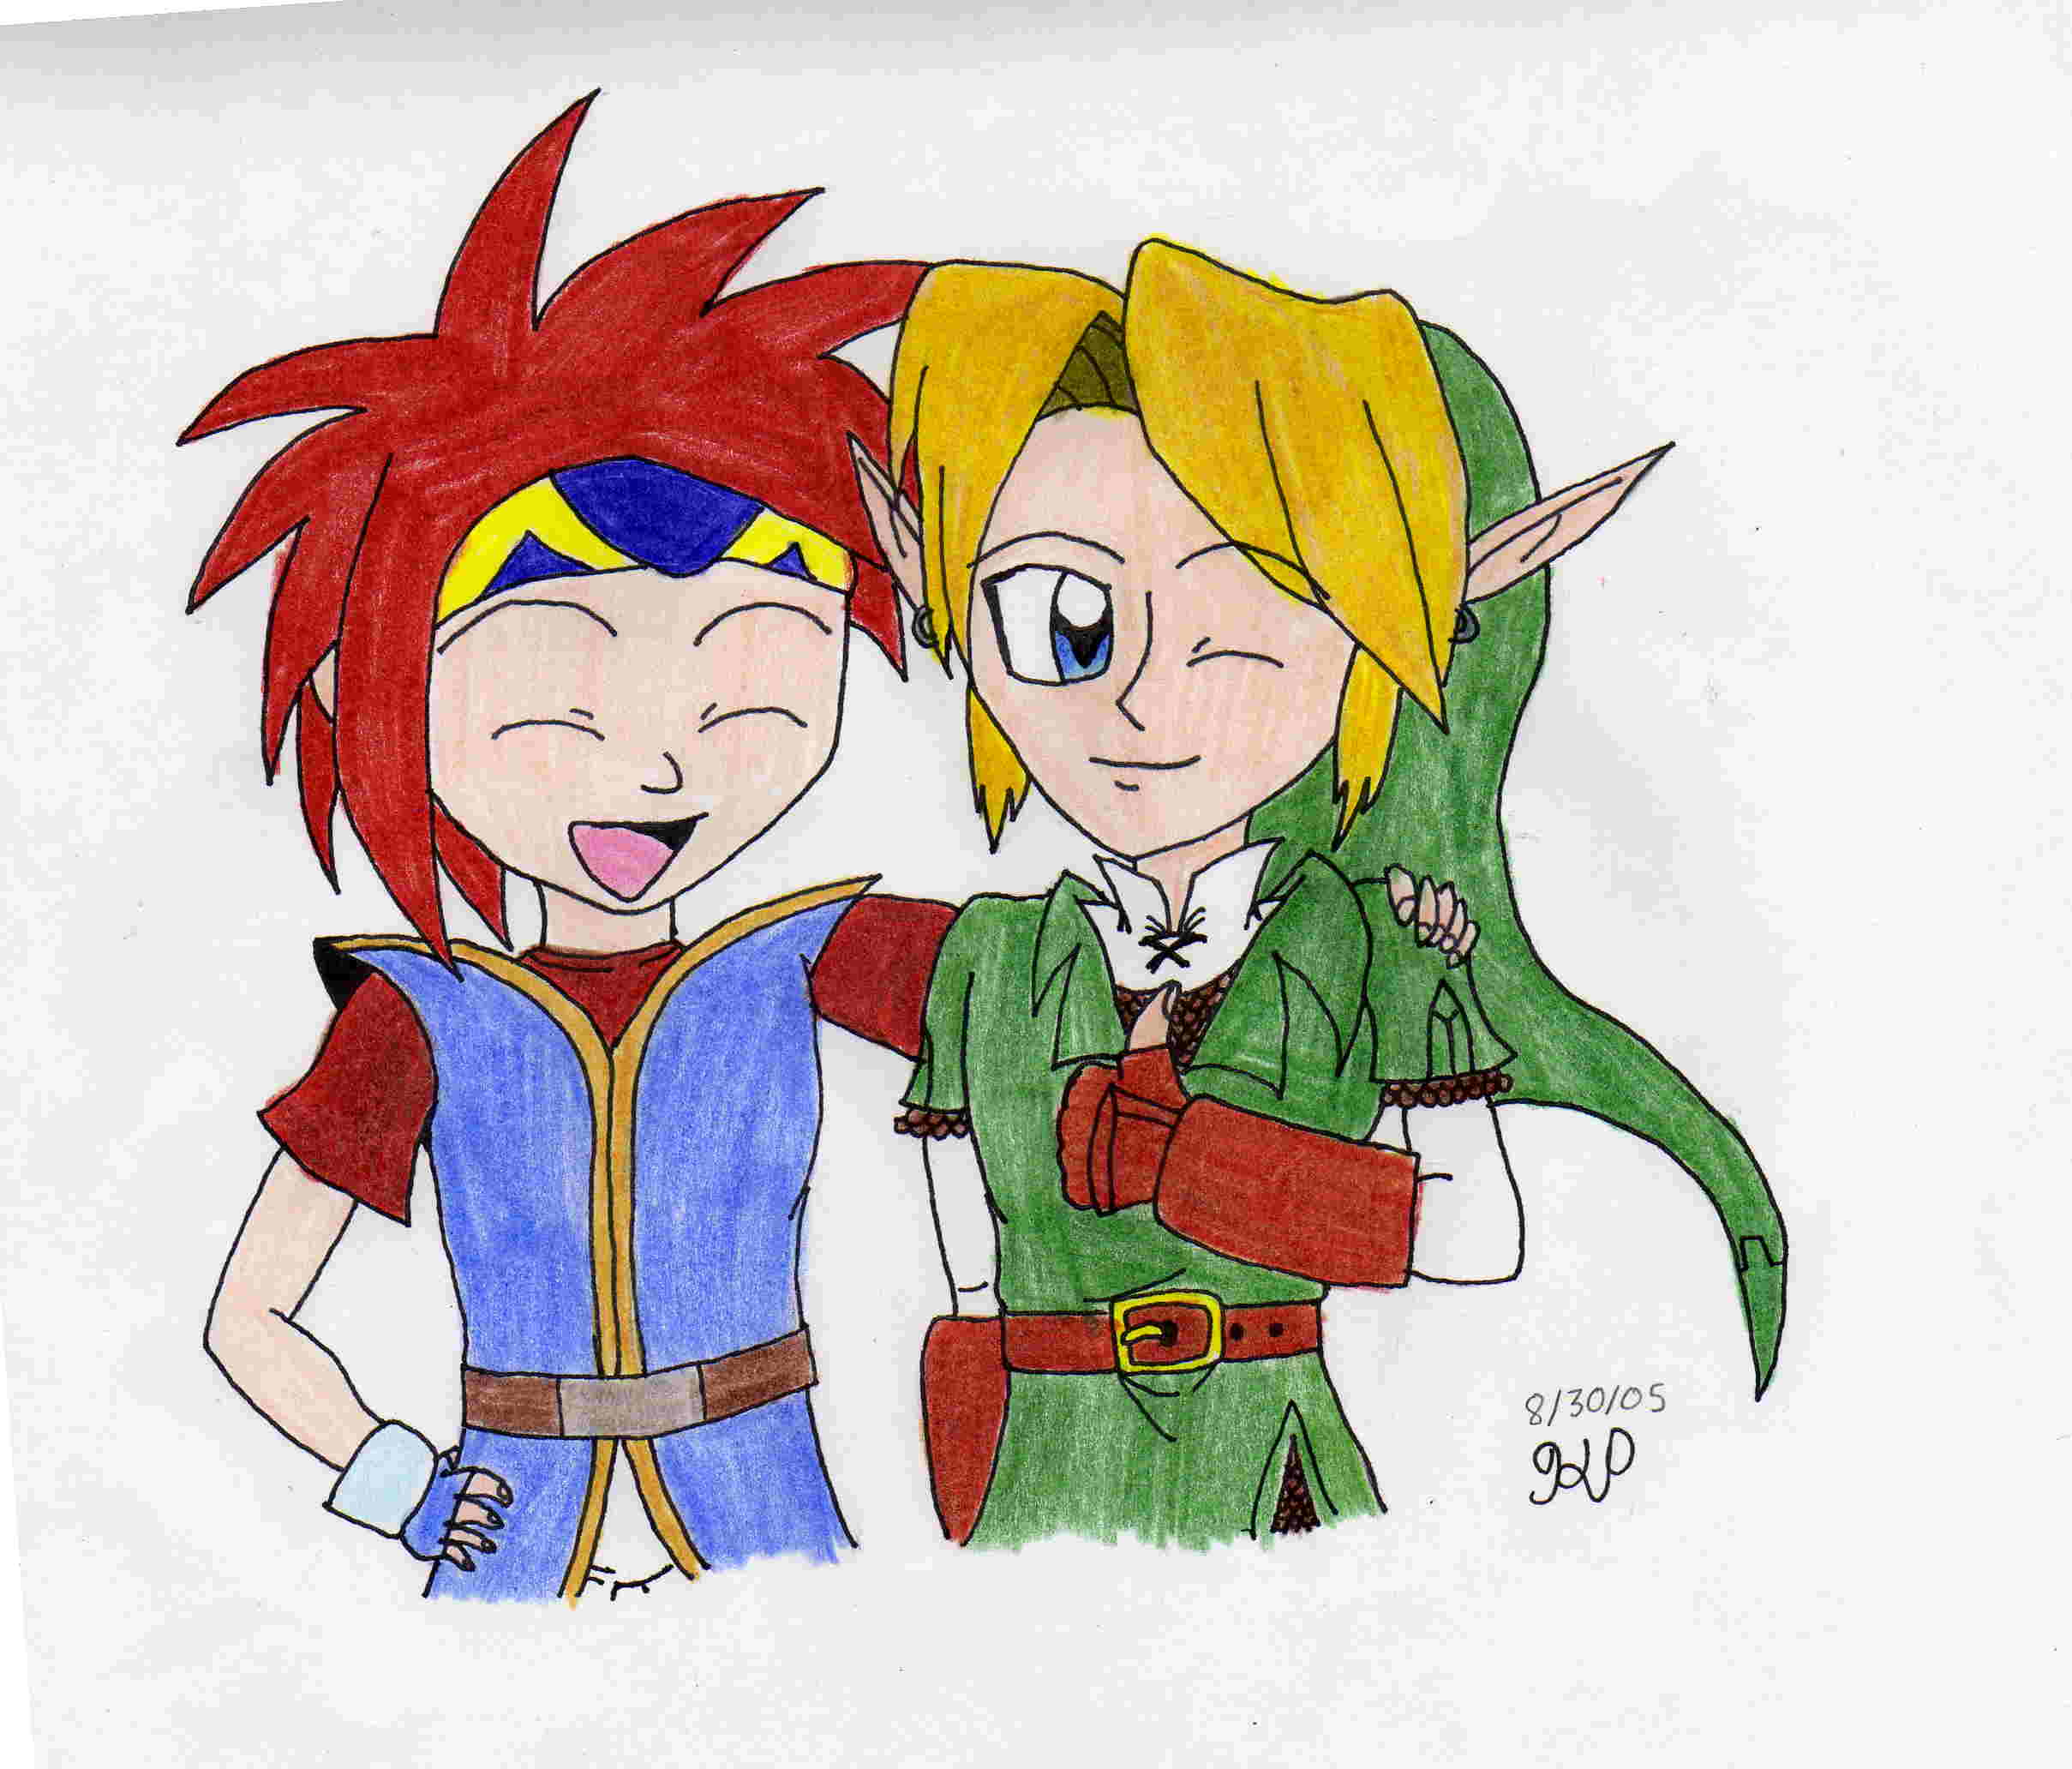 Link and Roy by Nintendo_Nut